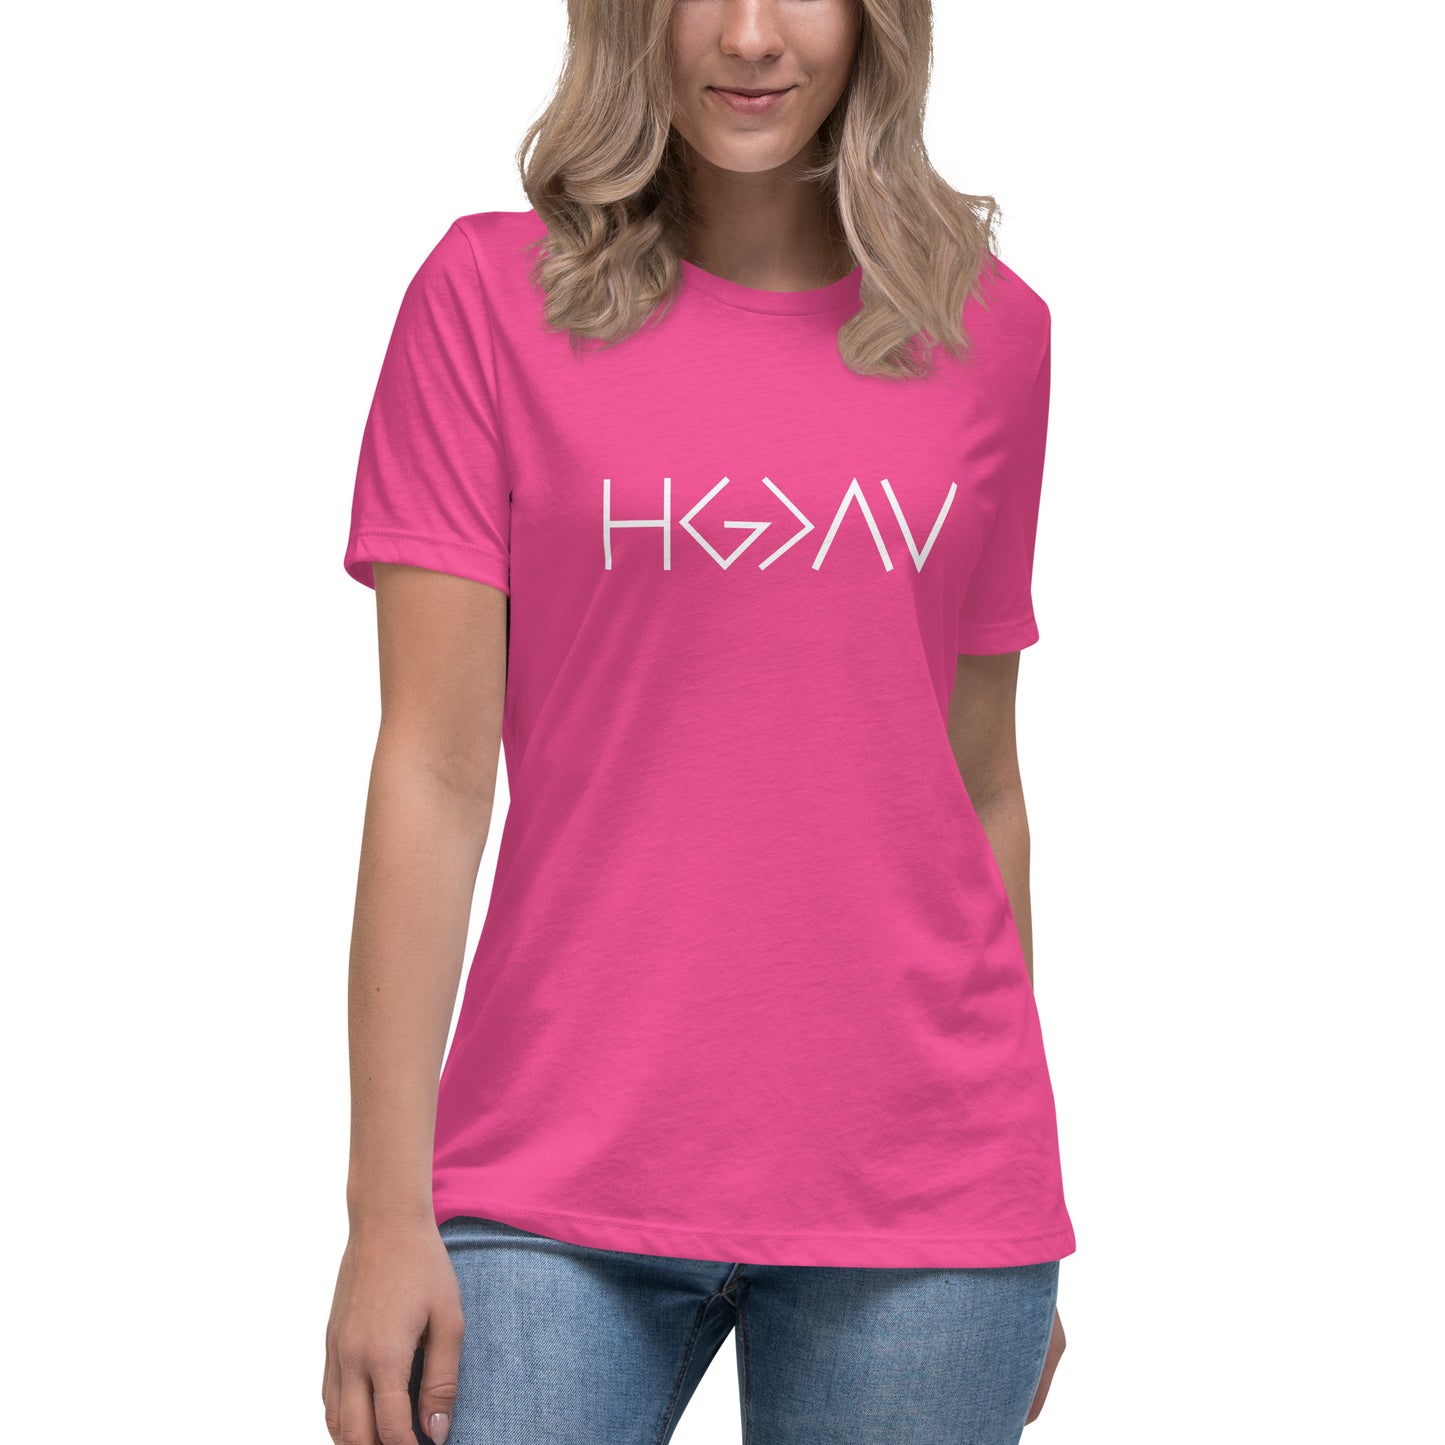 His Glory is Greater than the Highs and the Lows - Women's Relaxed T-Shirt